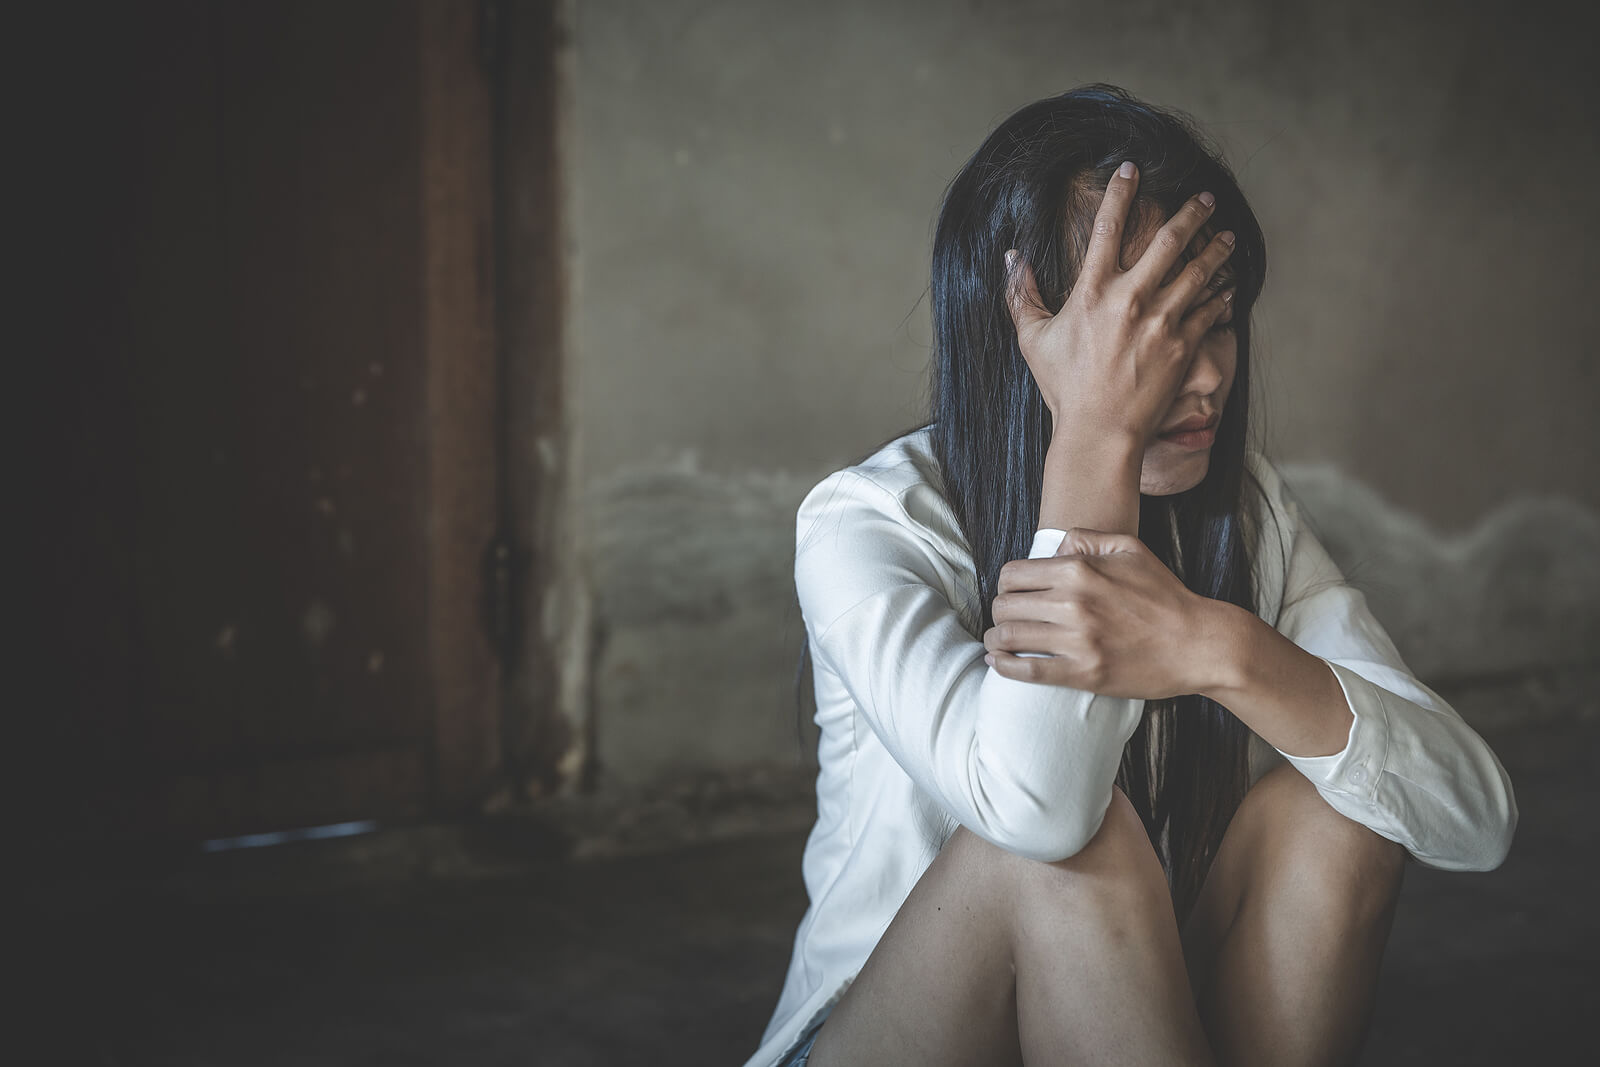 Woman sitting on the floor representing the mental health issues related to ADHD. If you are struggling with depression related to your ADHD we can help with ADHD-Focused Therapy for Depression in NYC. Learn more here.